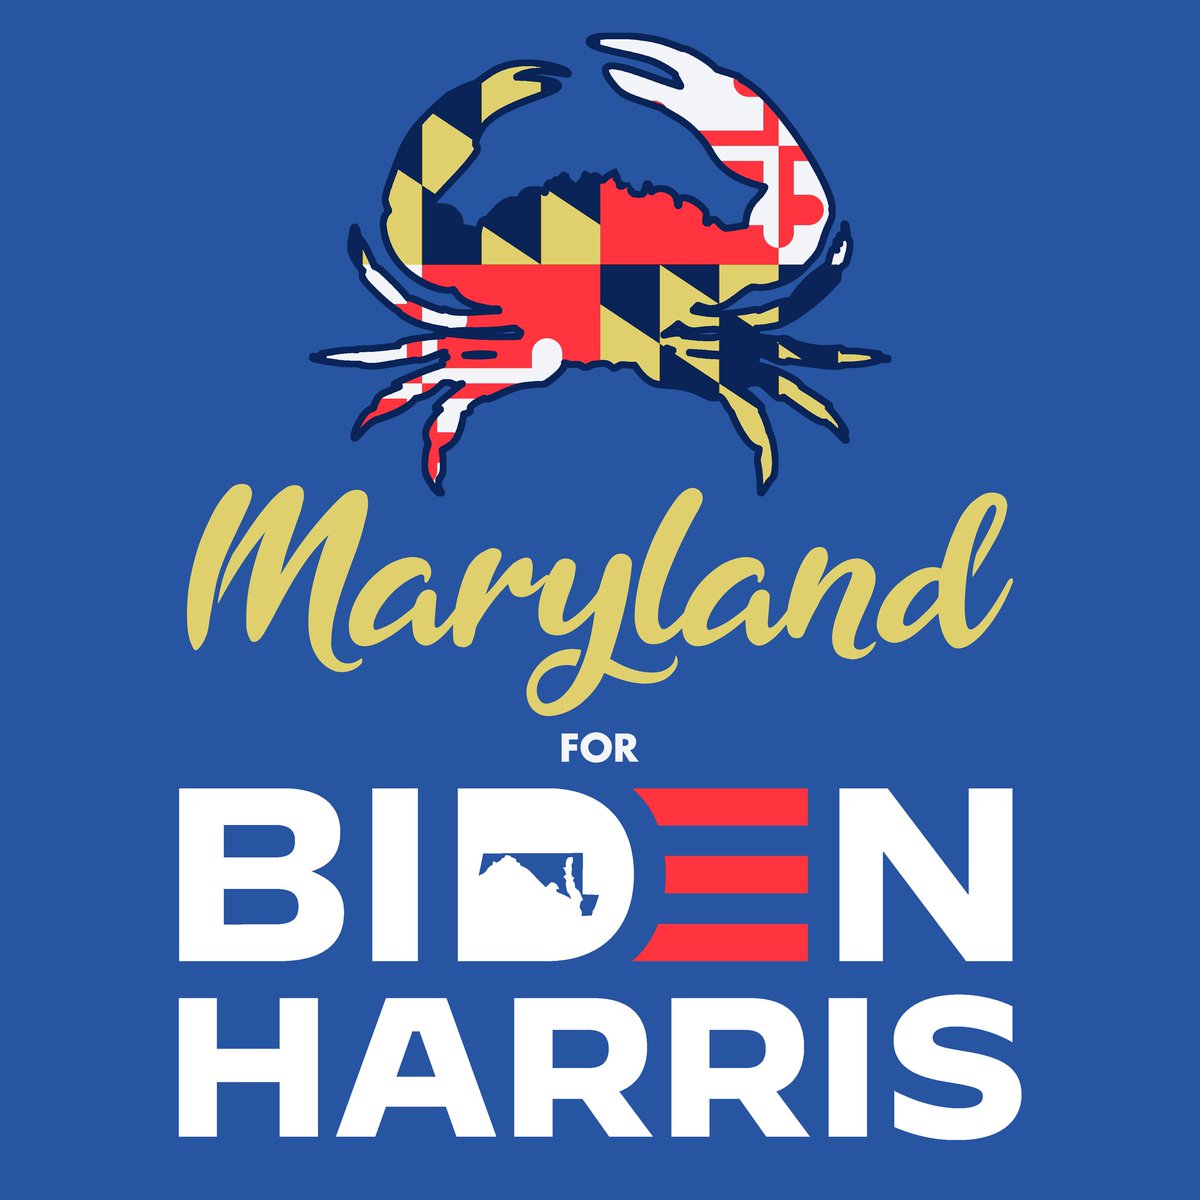 ICYMI my husband  @viva_verde is incredibly talented and made these beautiful state coalition graphics for  #BidenHarris supporters. More otw and he takes requests for priority! RT your state if you're  #RidinWithBidenHarris 4/8  #Maryland  #Michigan  #Minnesota  #Nevada